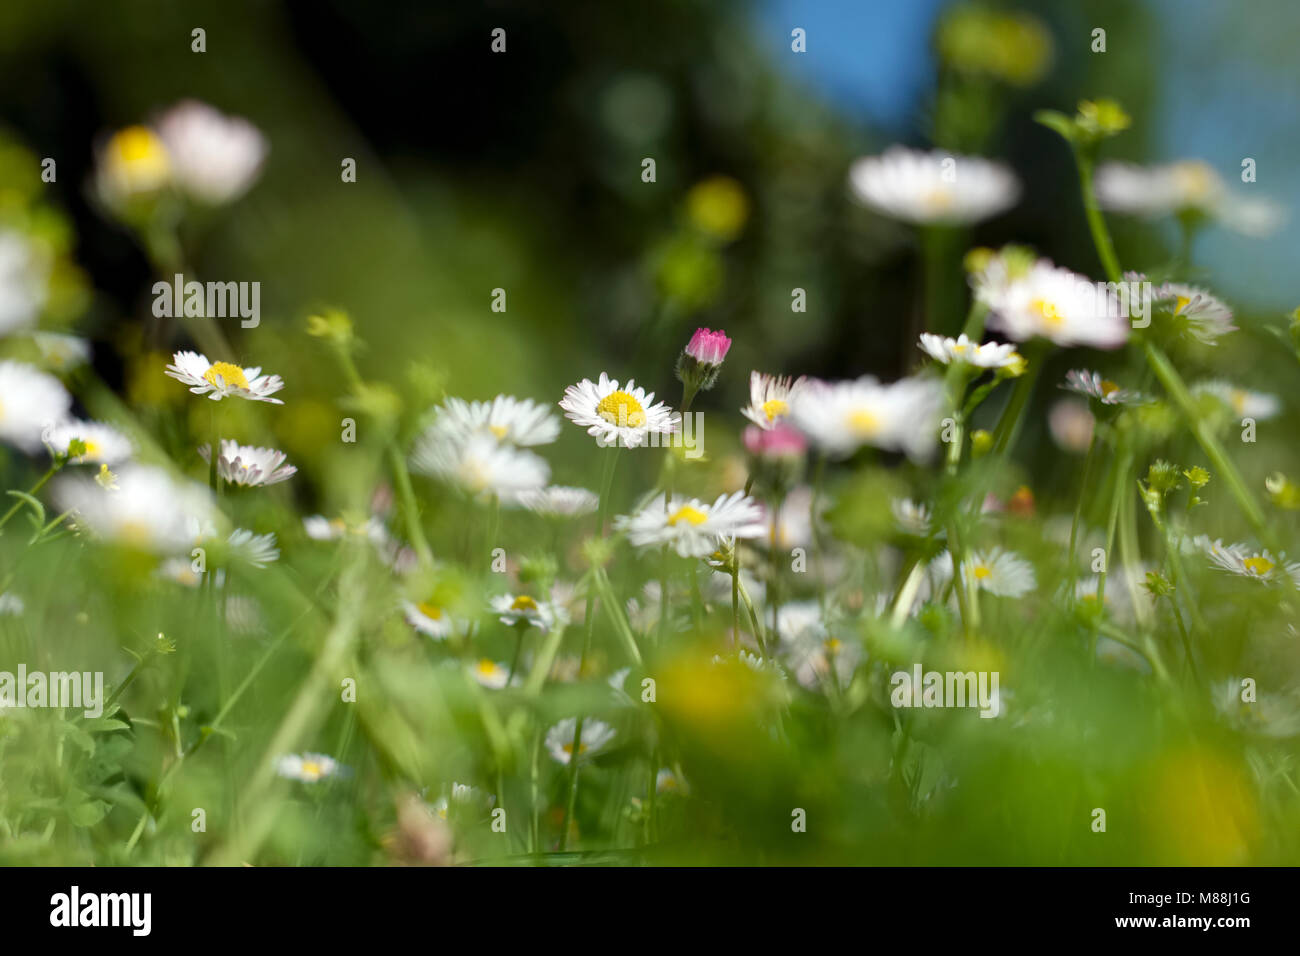 Daisies (Bellis perennis) in a field Stock Photo